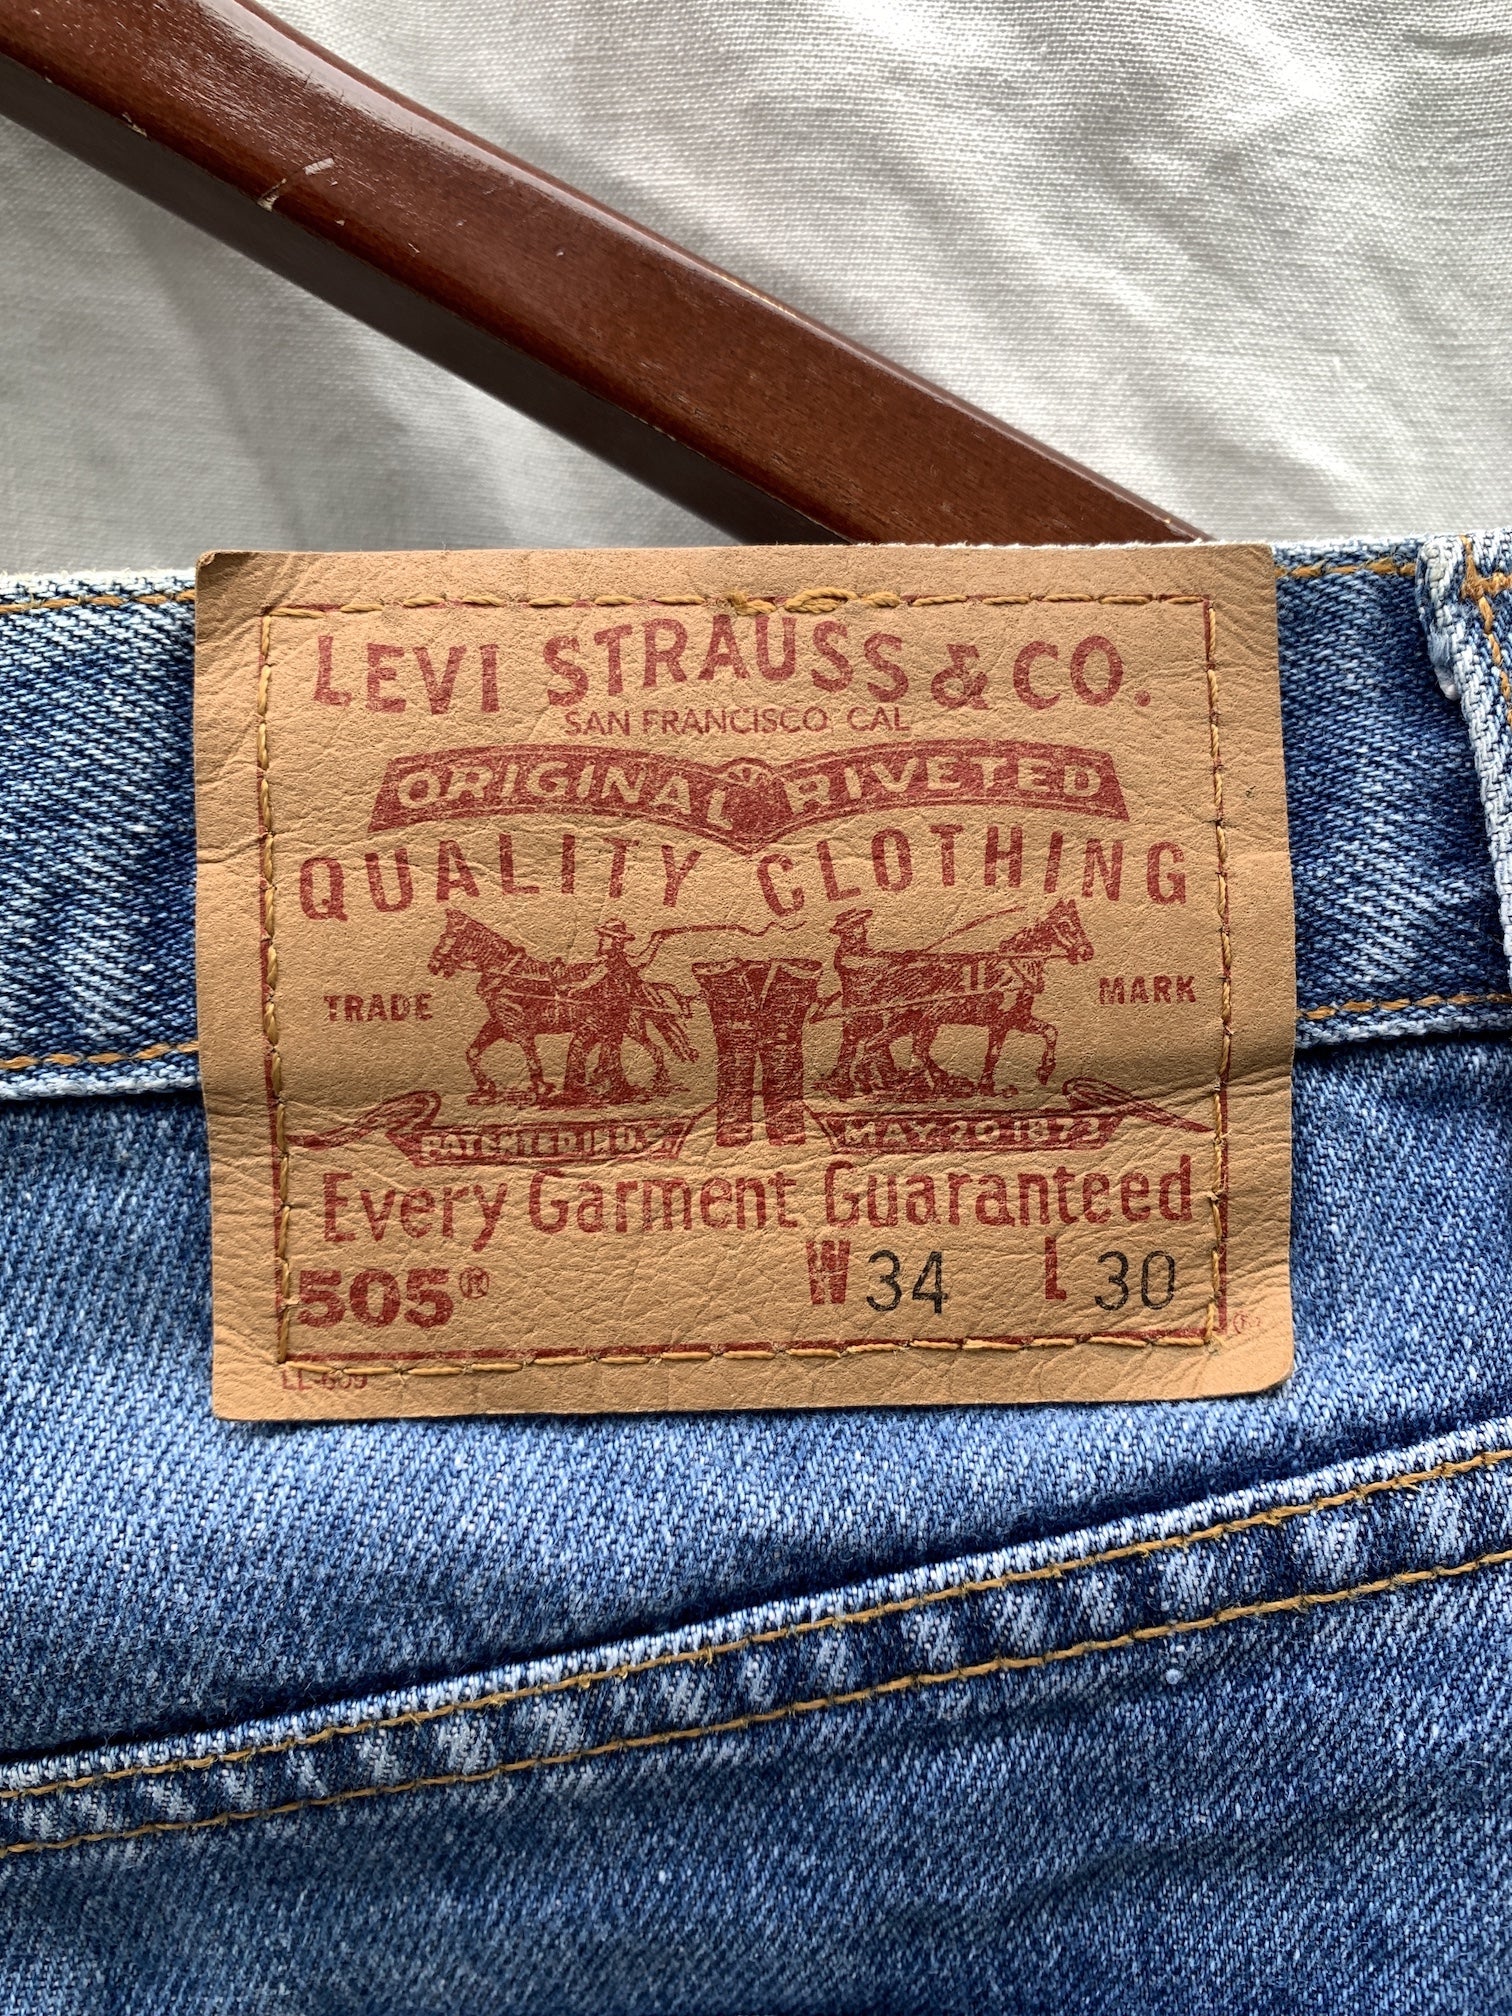 90's ~ 00's Levi's 505 Made in Mexico | THE MAN CAVE by ILLMINATE blog